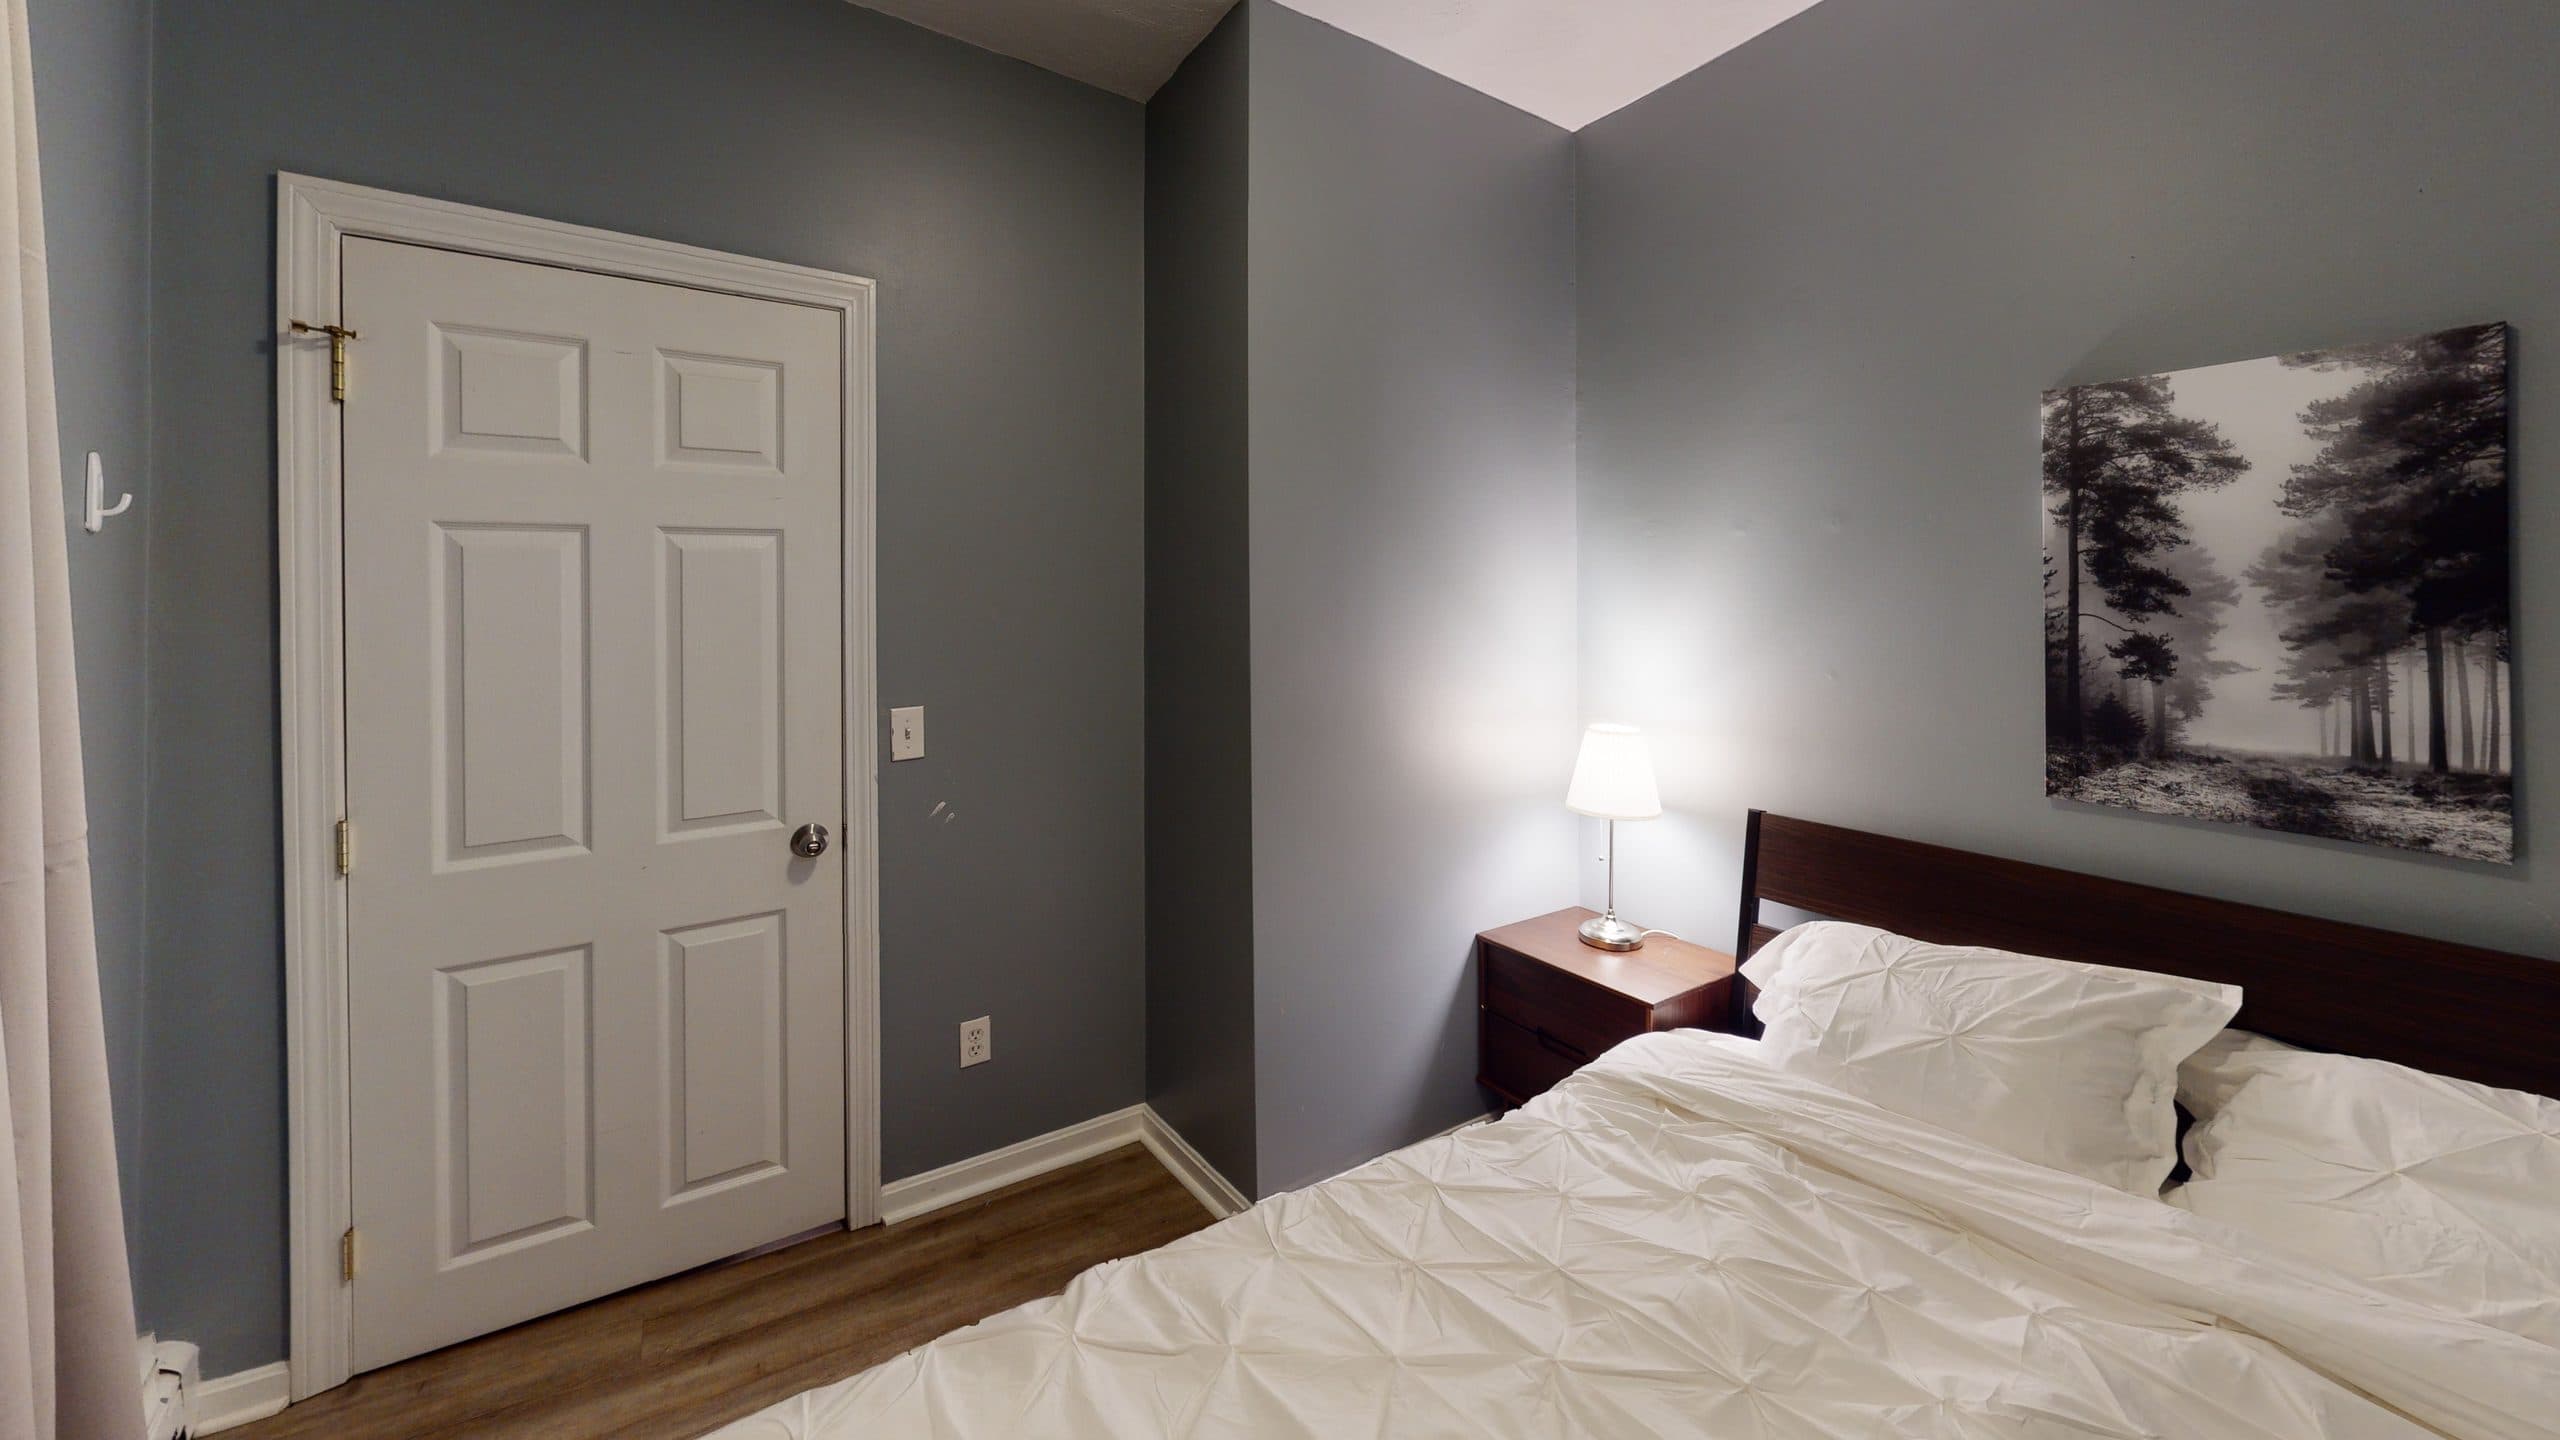 Photo 18 of #1287: Queen Bedroom A at June Homes